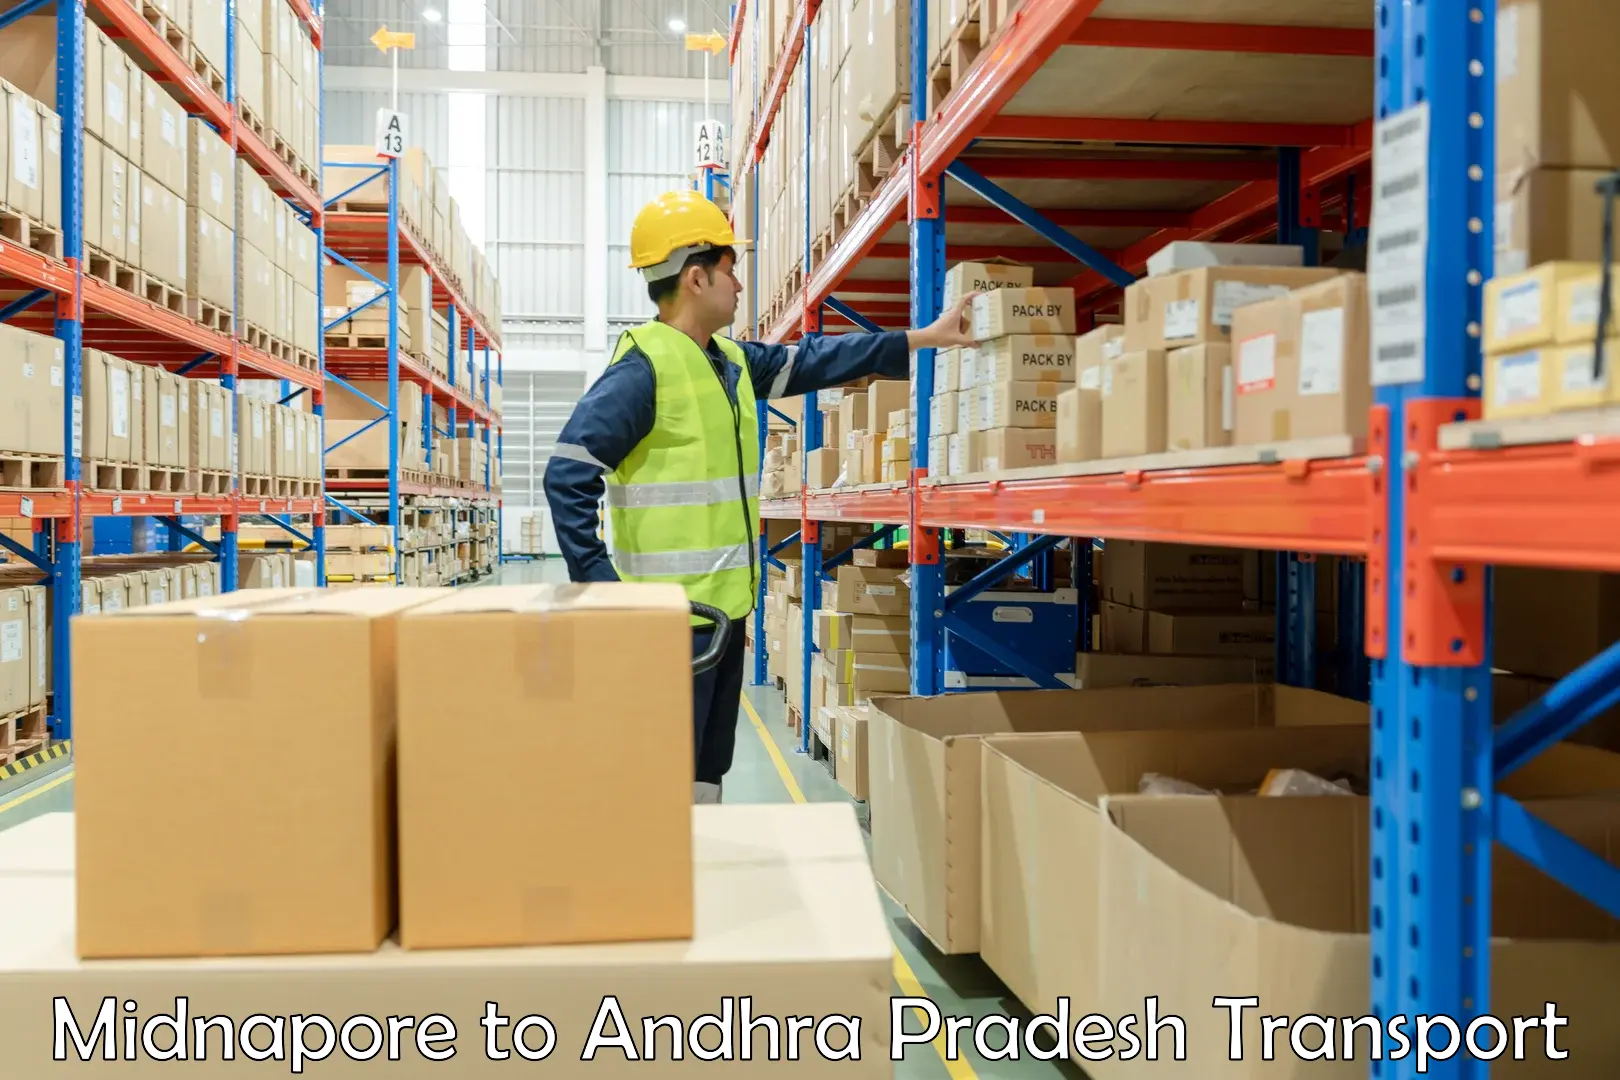 Domestic goods transportation services in Midnapore to Andhra Pradesh